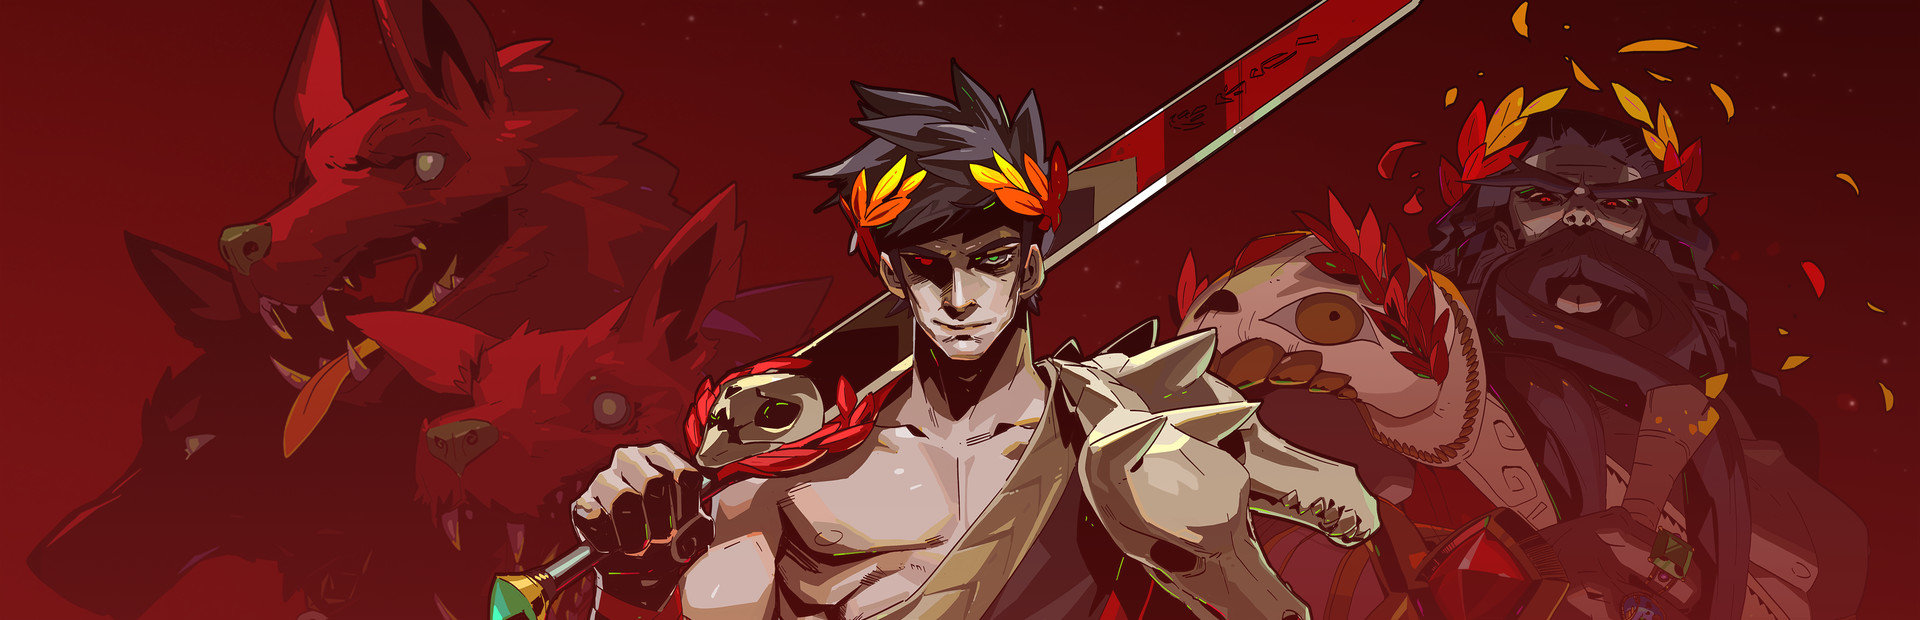 download hades 2 supergiant